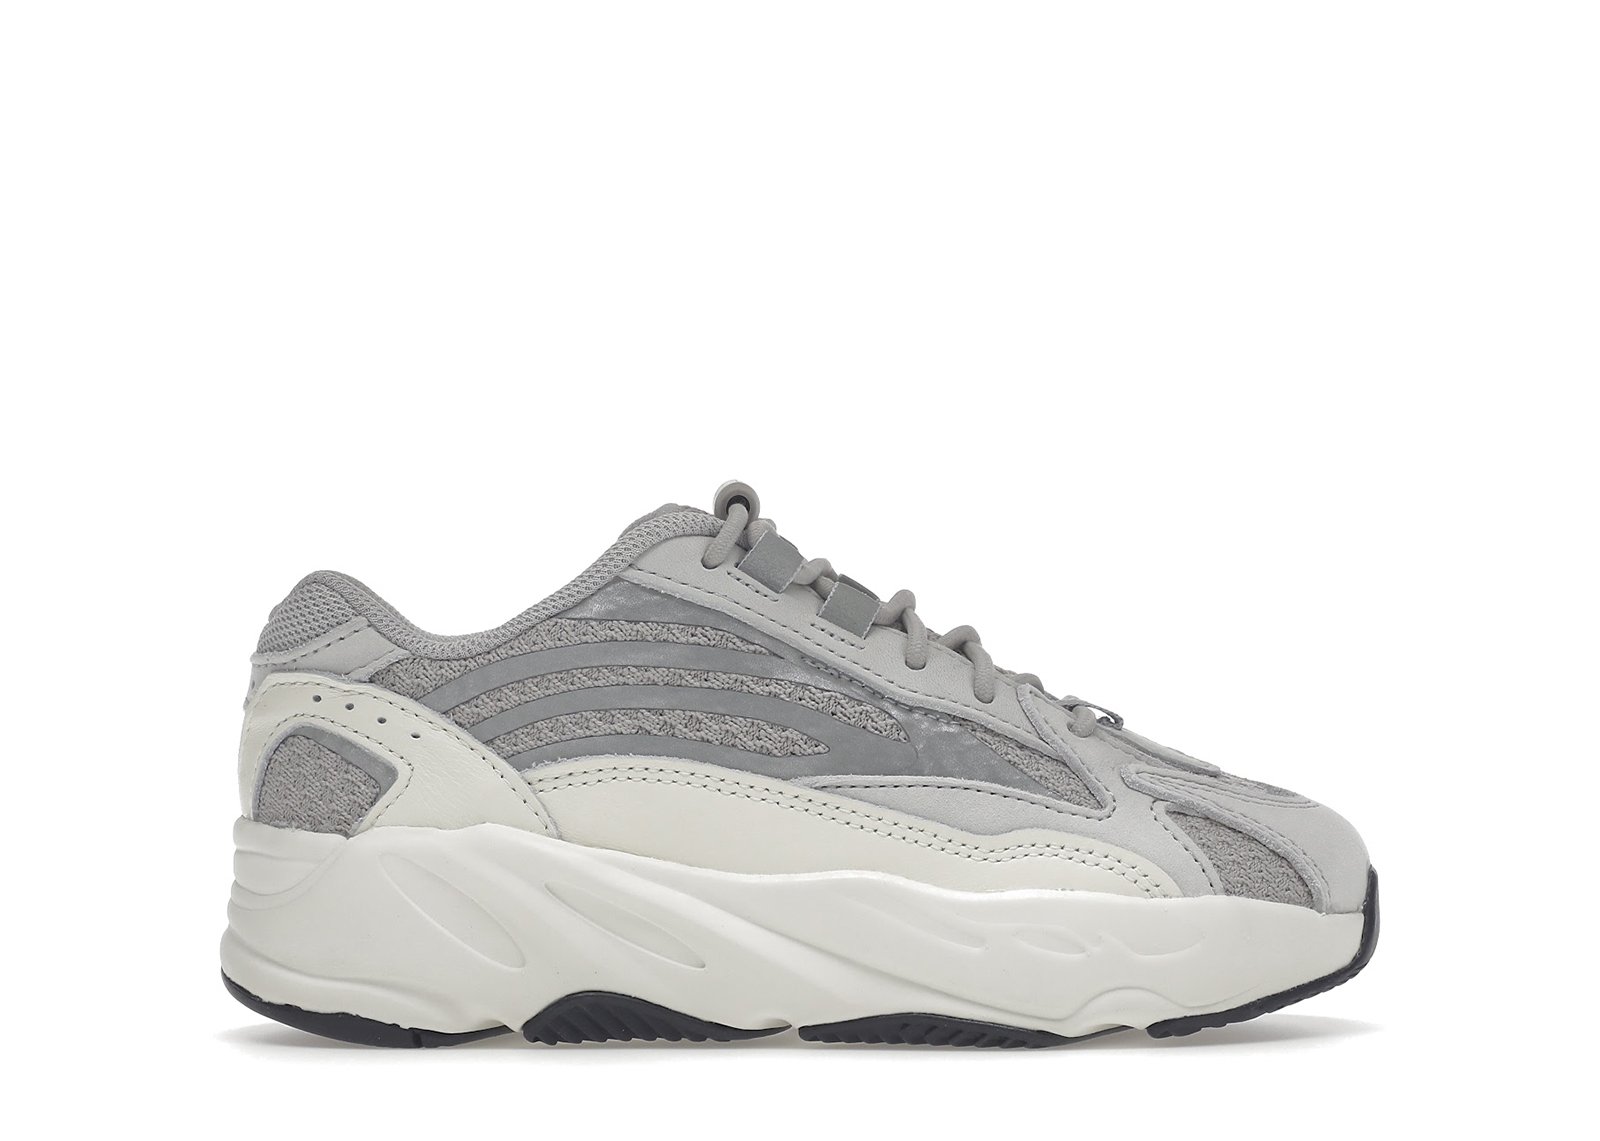 adidas Yeezy Boost 700 V2 Static (Kids) sneakers